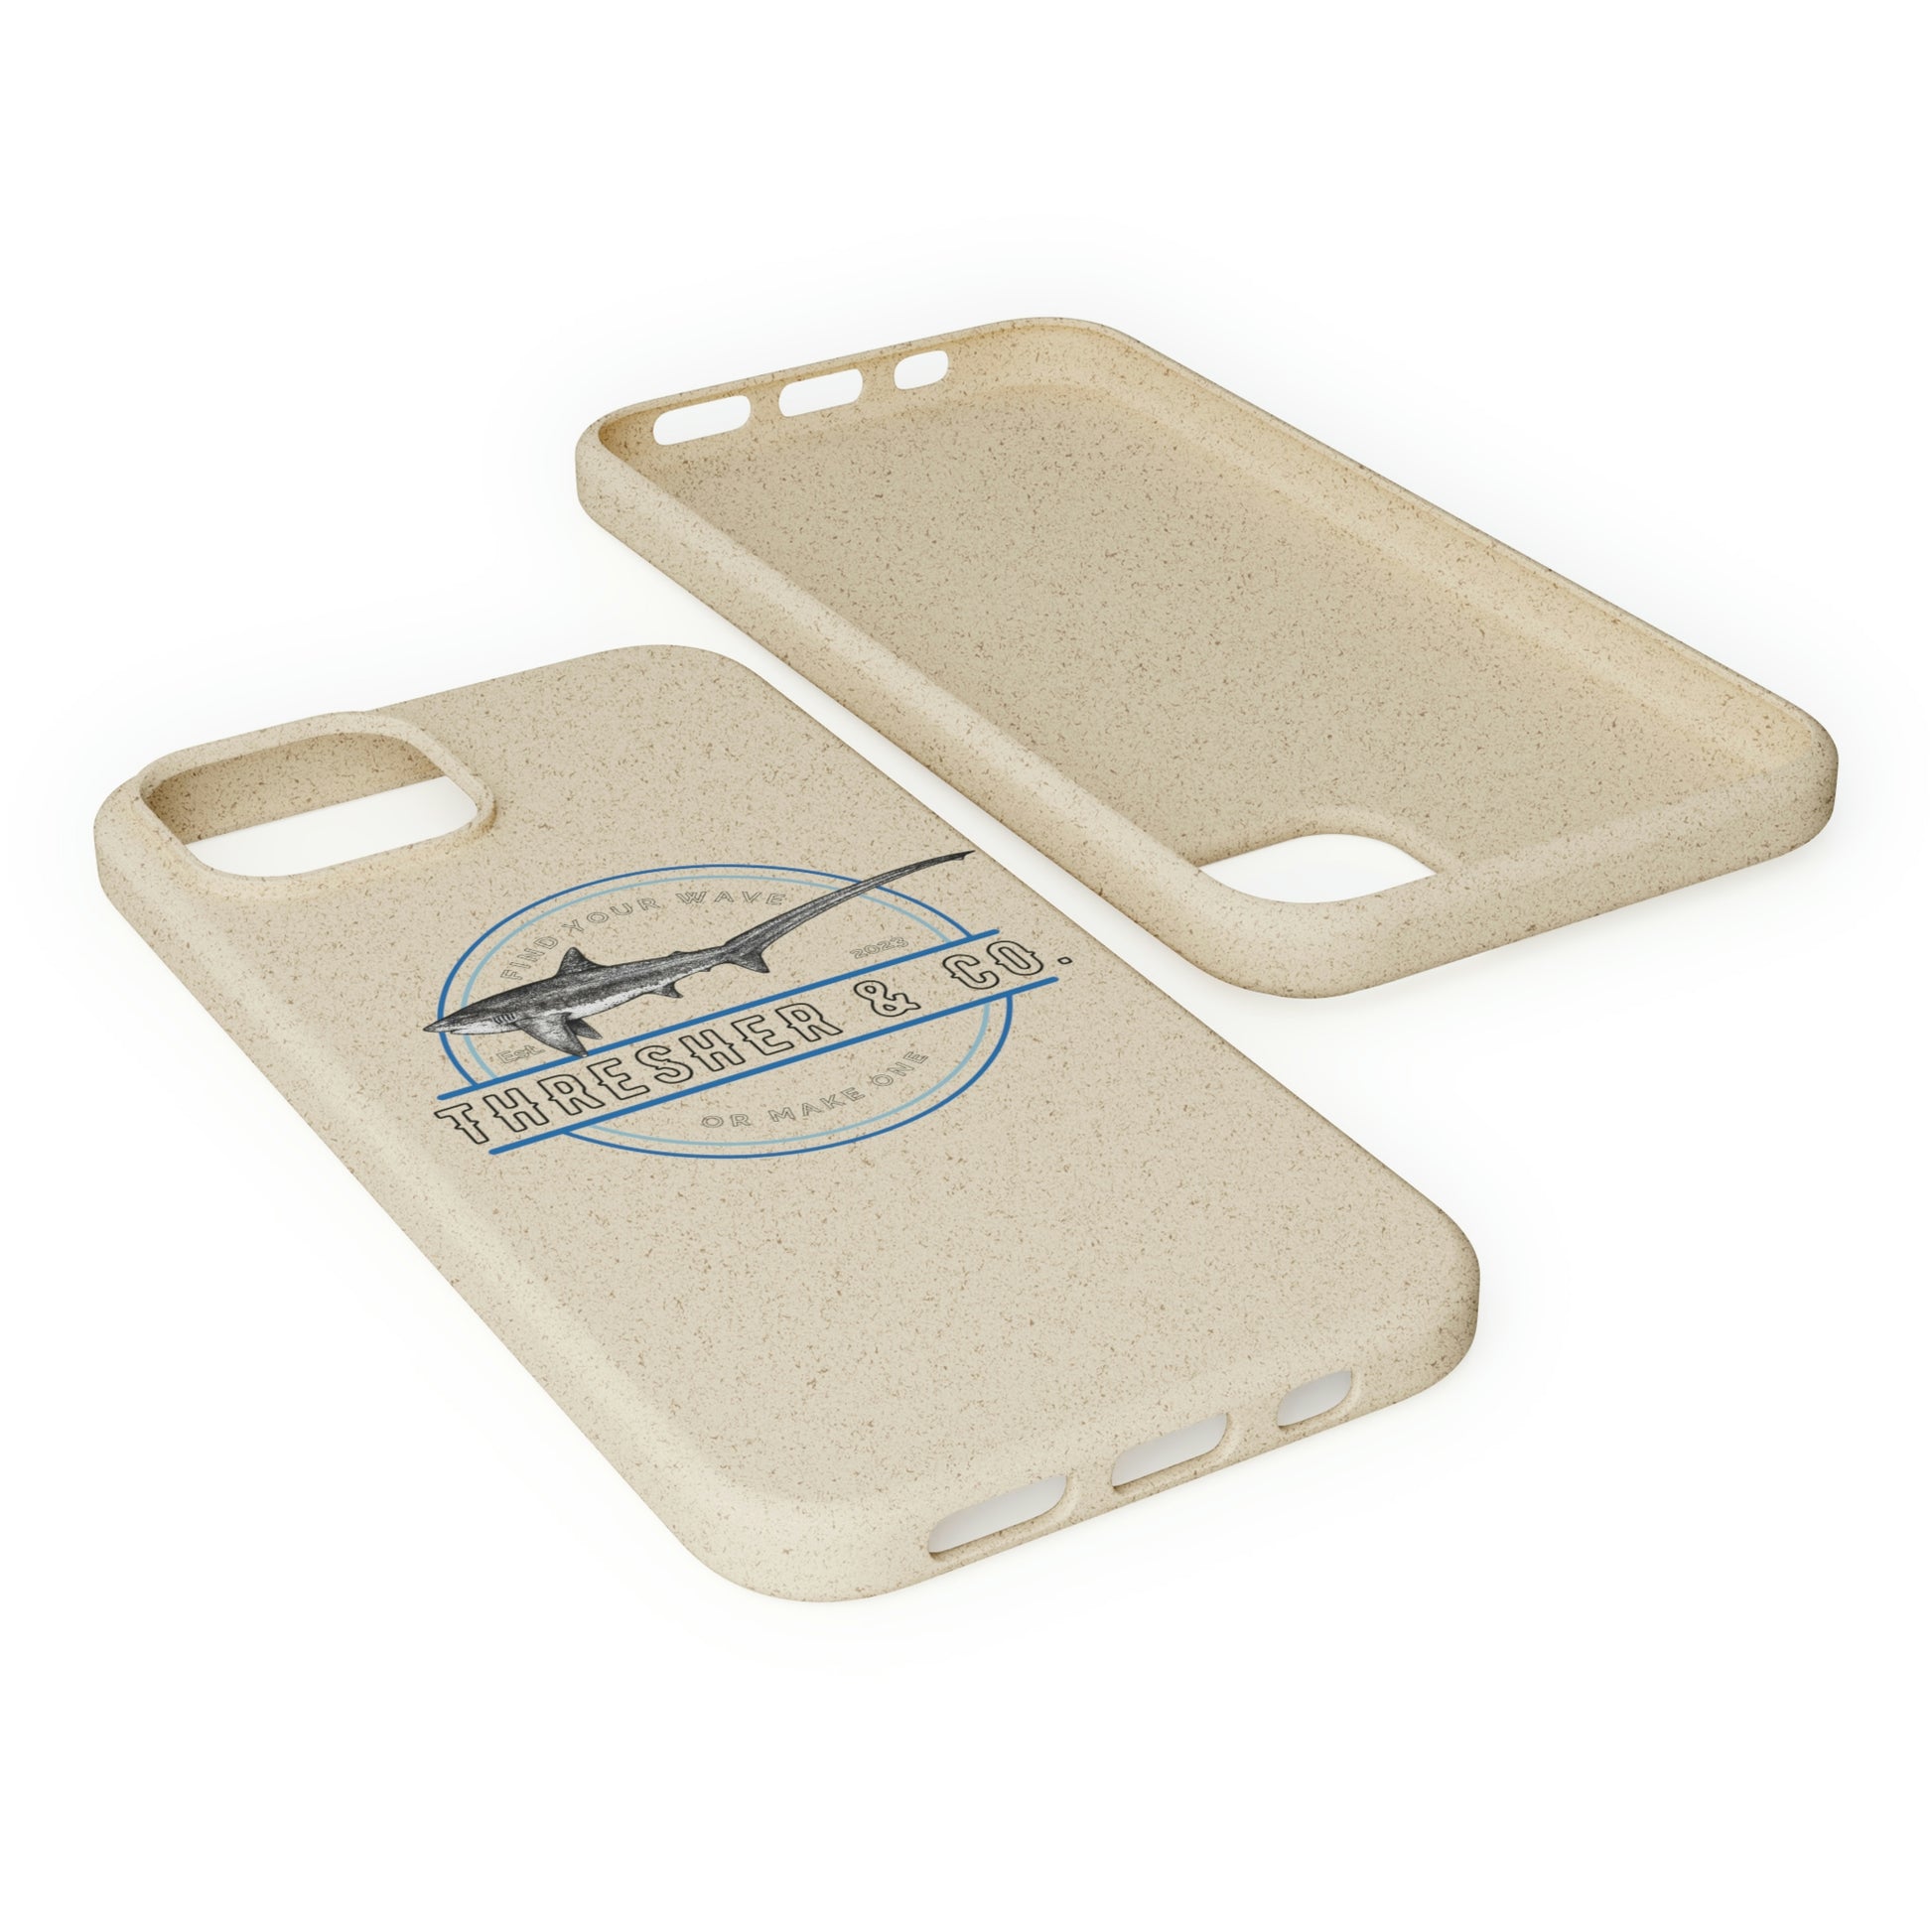 Rep Your Shiver Biodegradable Cases - Thresher & Co.